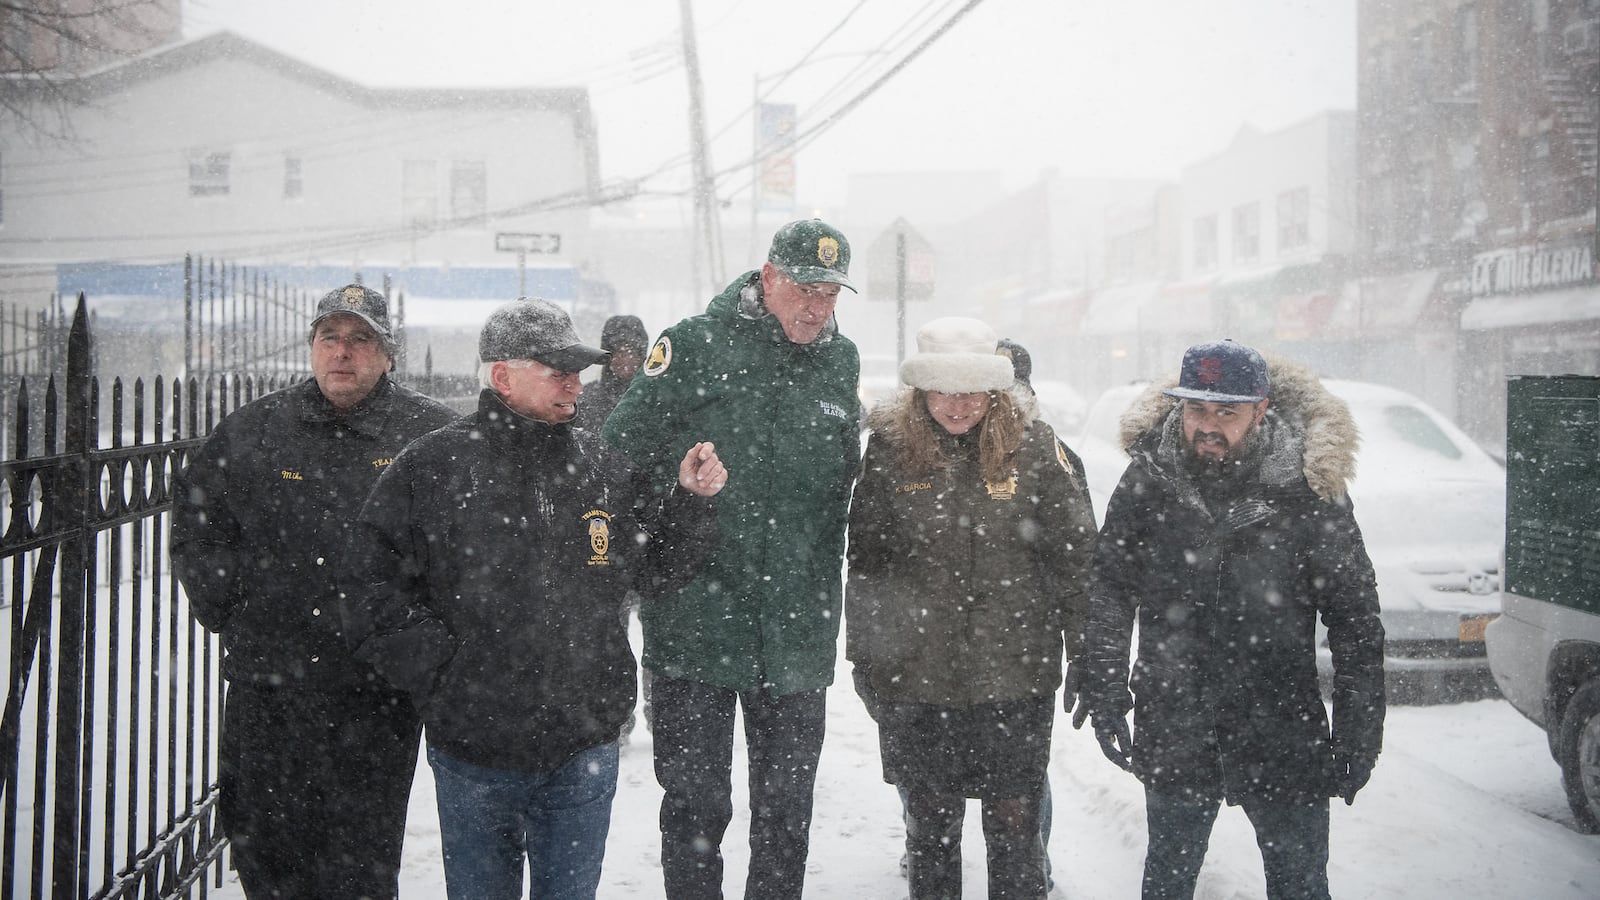 Mayor Bill de Blasio toured a snow-covered neighborhood in Queens with other city officials Thursday.